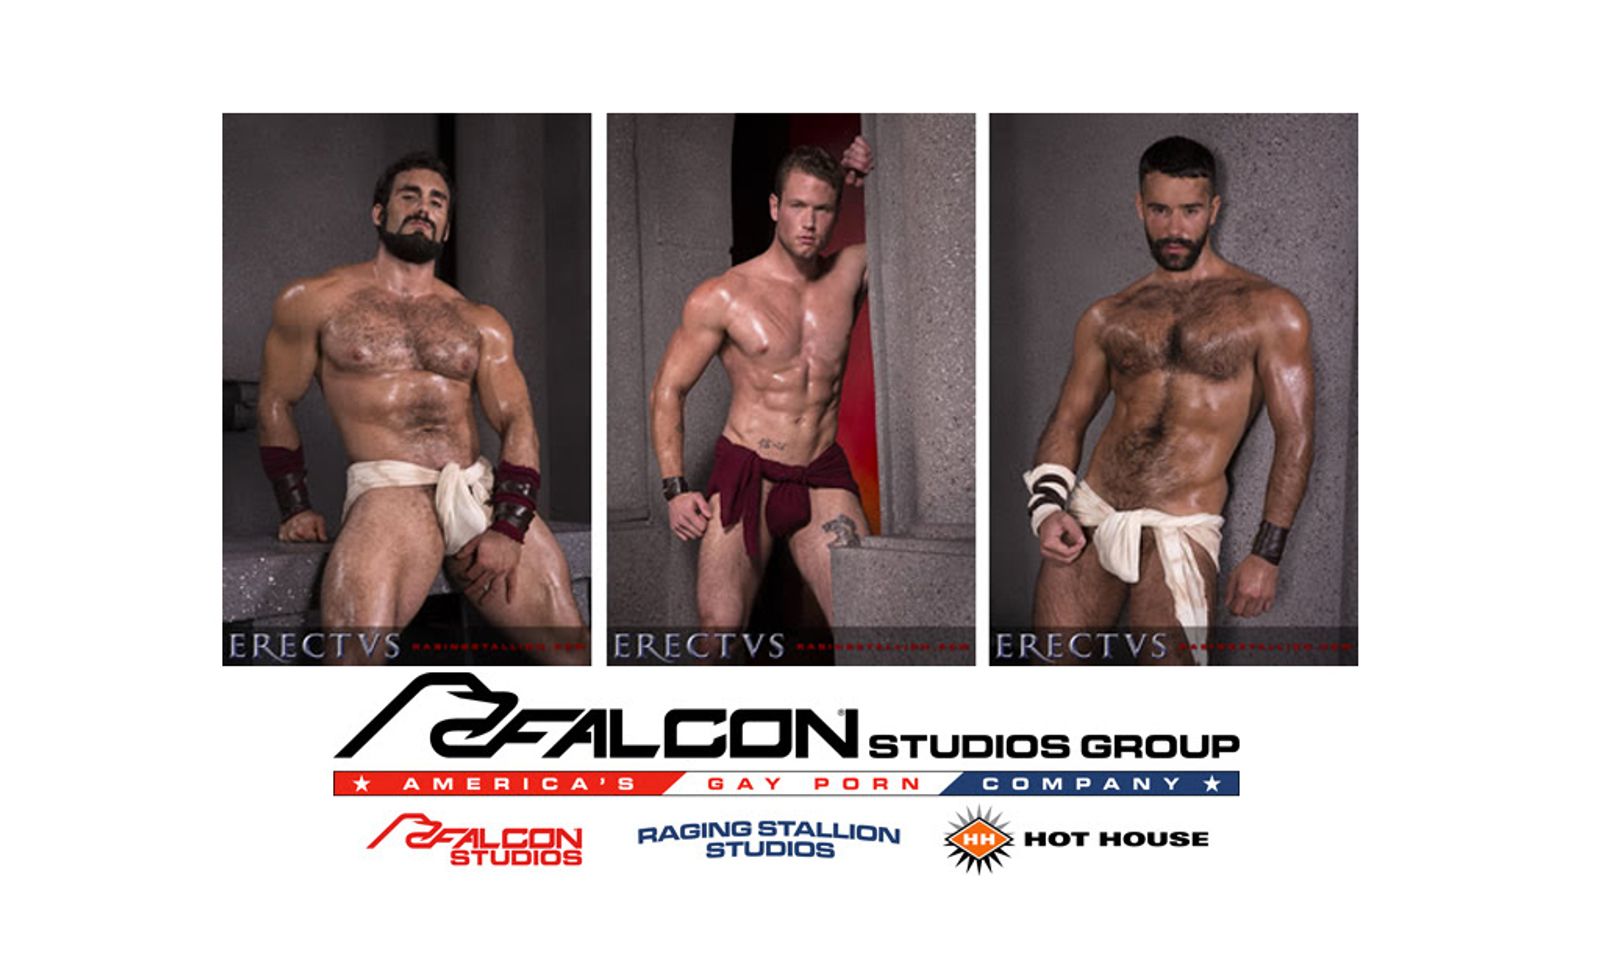 RagingStallion.com Delivers First Look at 'Erectus' Tomorrow